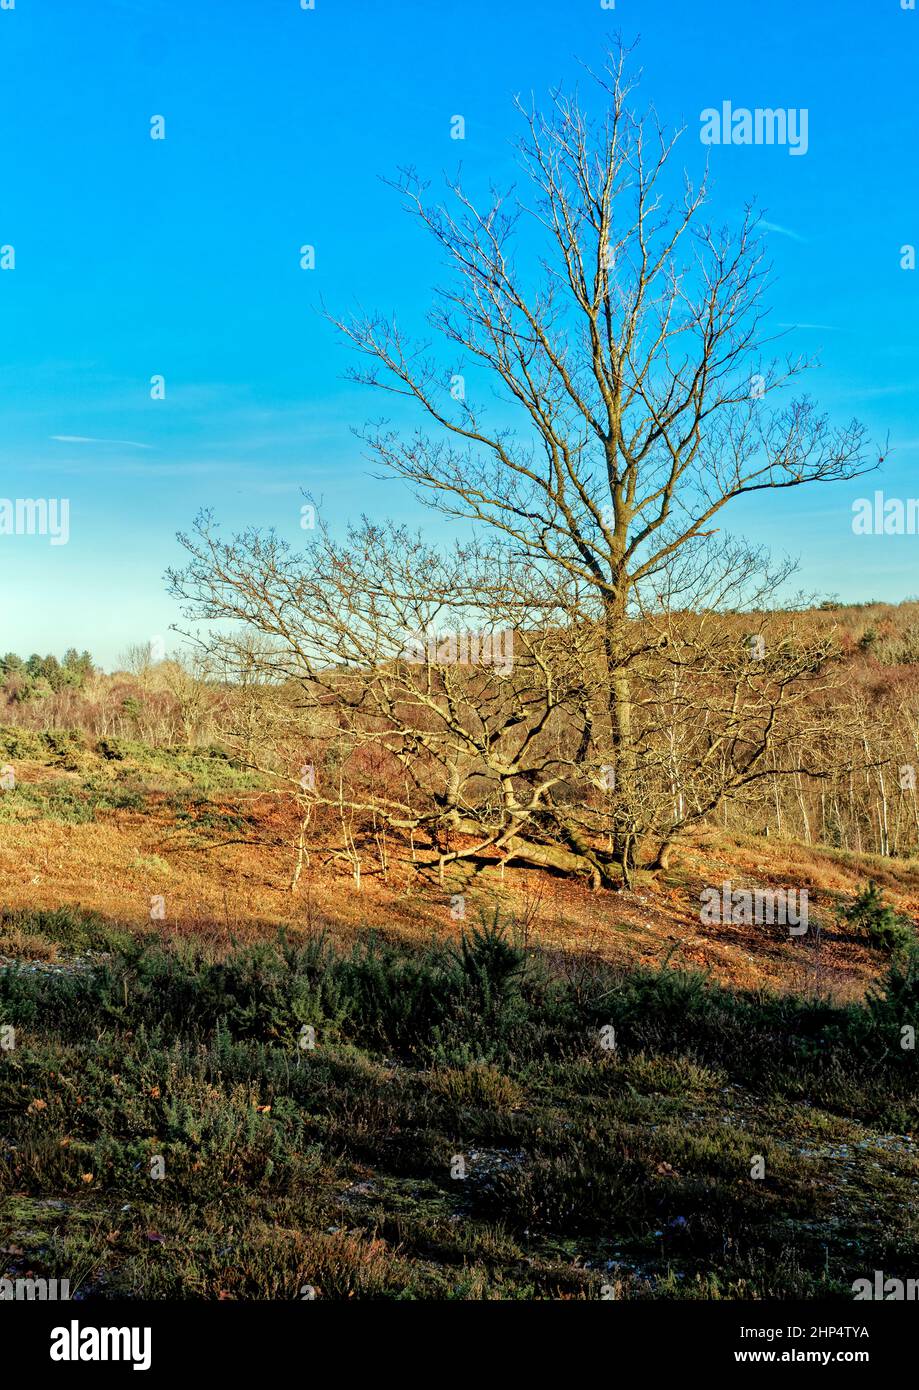 Typical North Norfolk heathlandat Holt Lowes with a mix of bracken, gorse and scattered trees on the infertile sandy and stony soil, Stock Photo